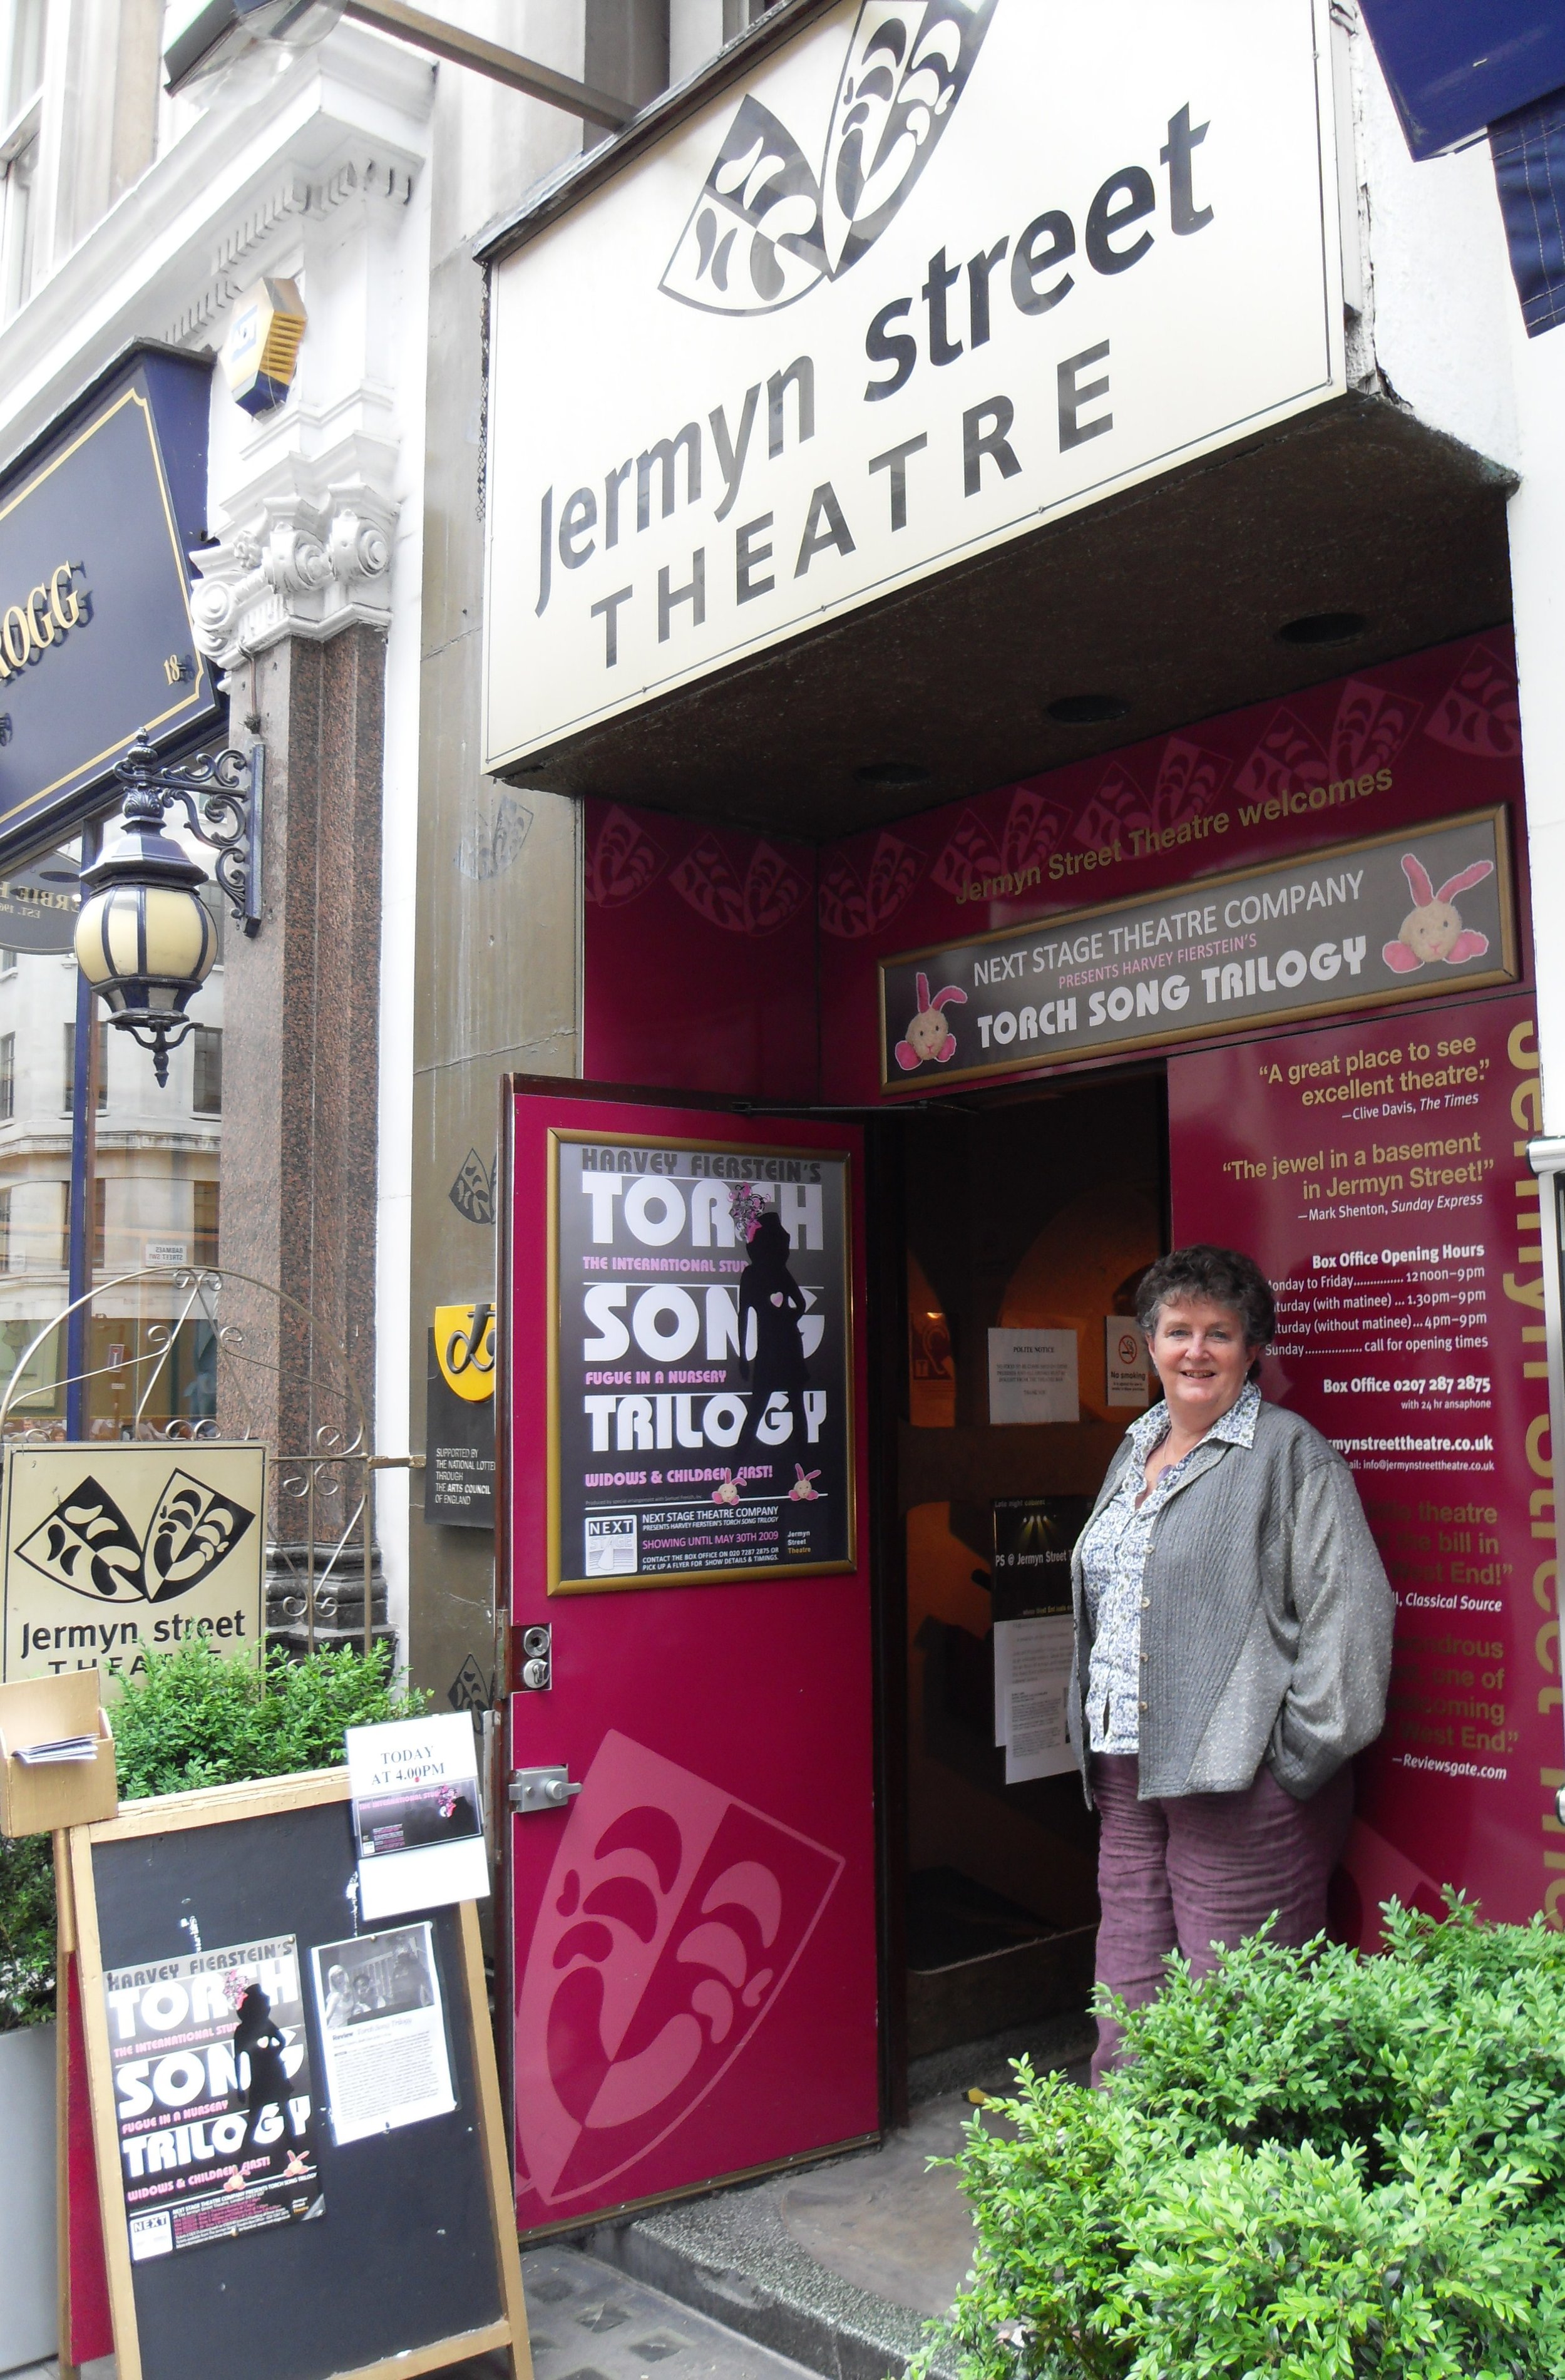 The entrance to Jermyn Street Theatre